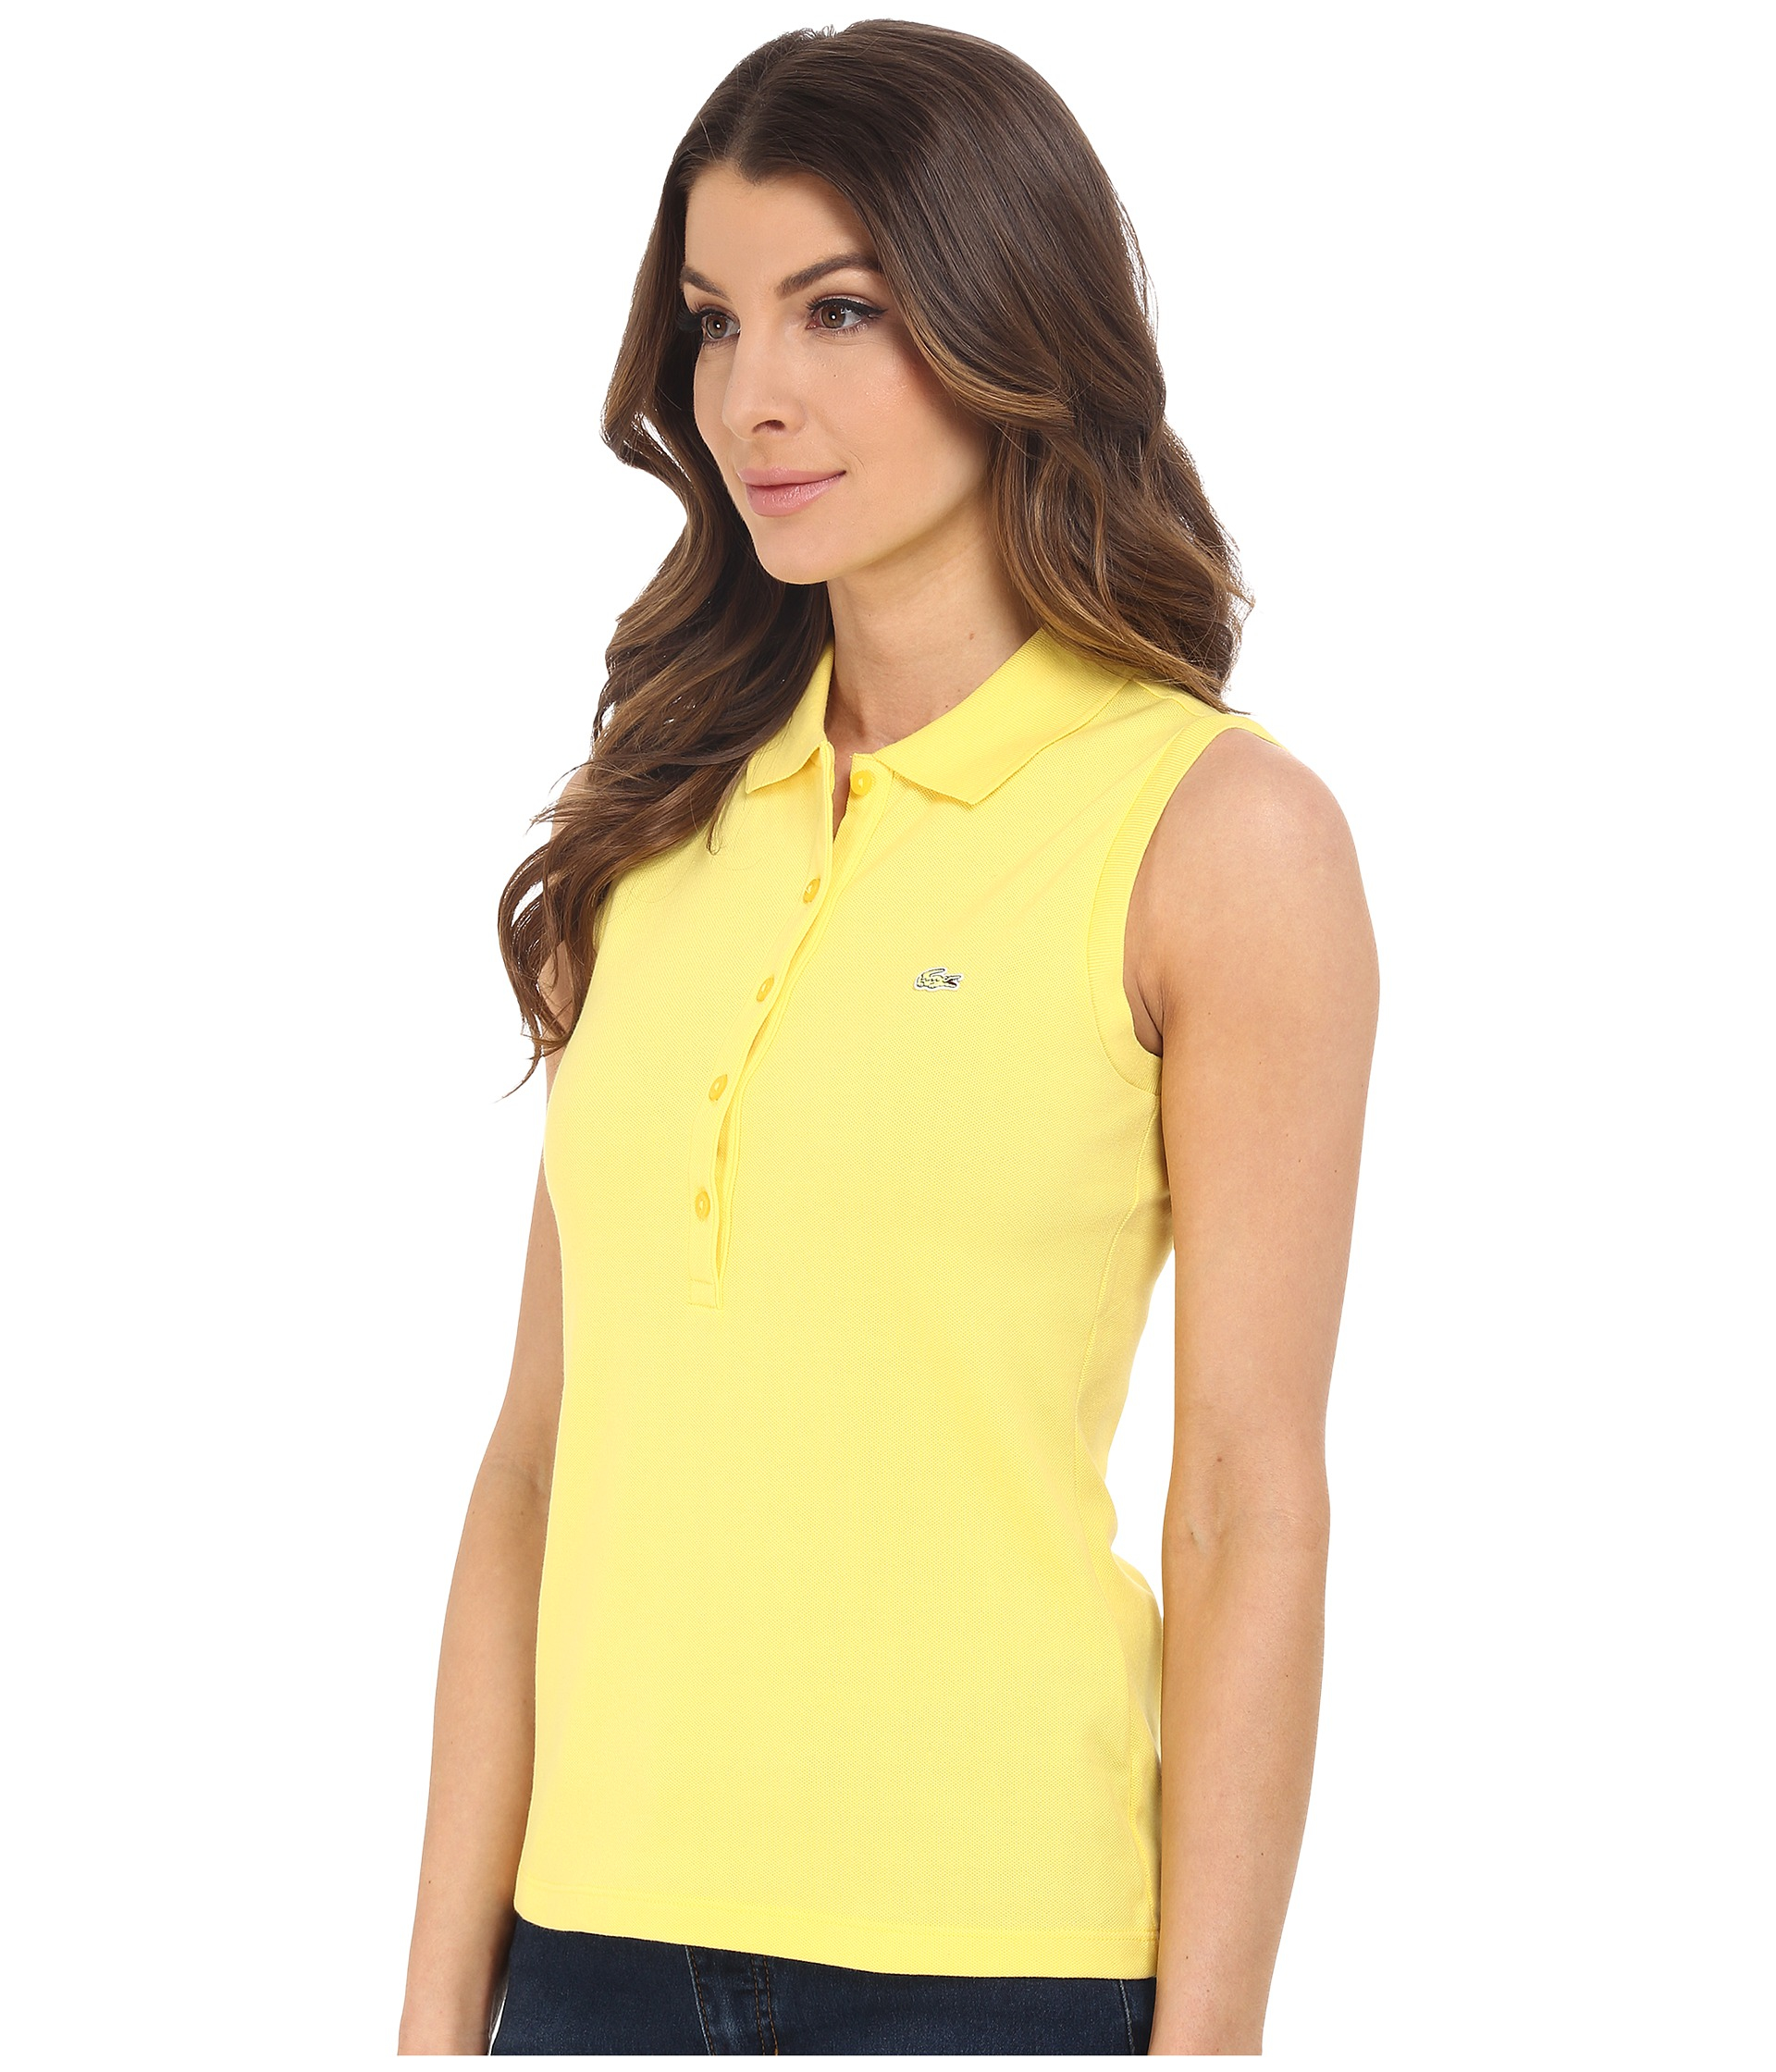 Lacoste Cotton Sleeveless Slim Fit Stretch Pique Polo Shirt in Yellow | Lyst